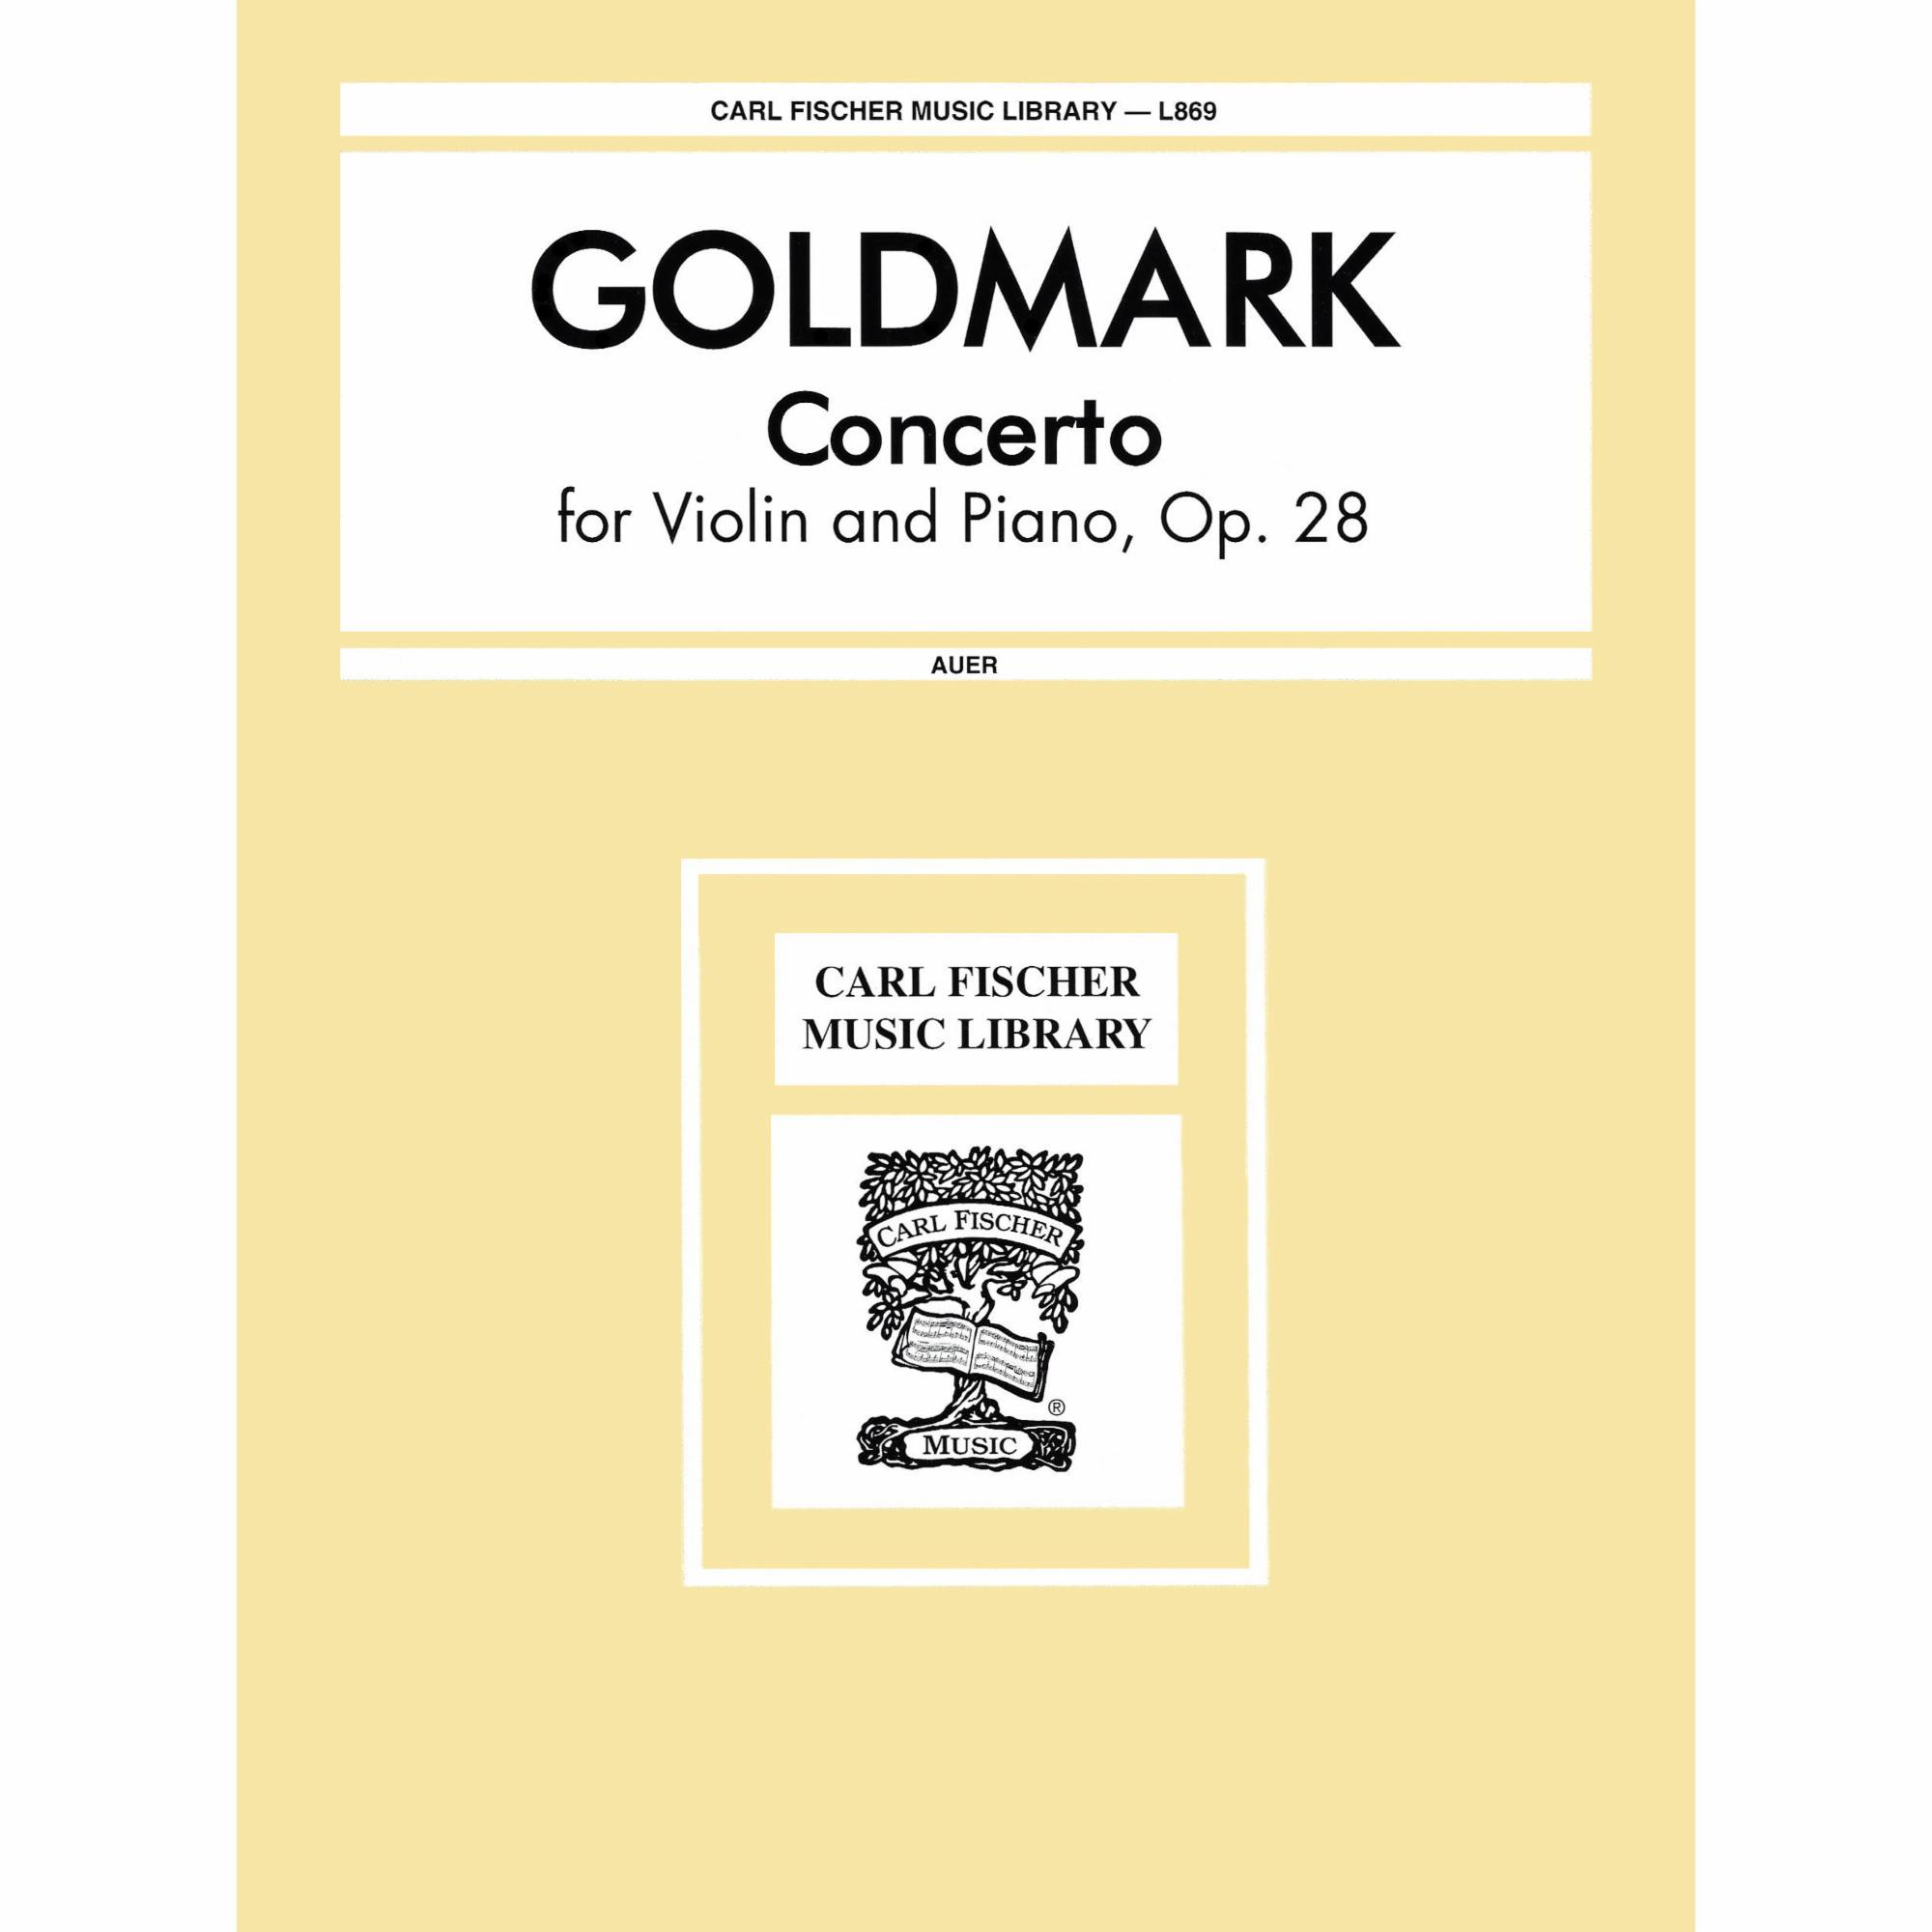 Goldmark -- Concerto, Op. 28 for Violin and Piano